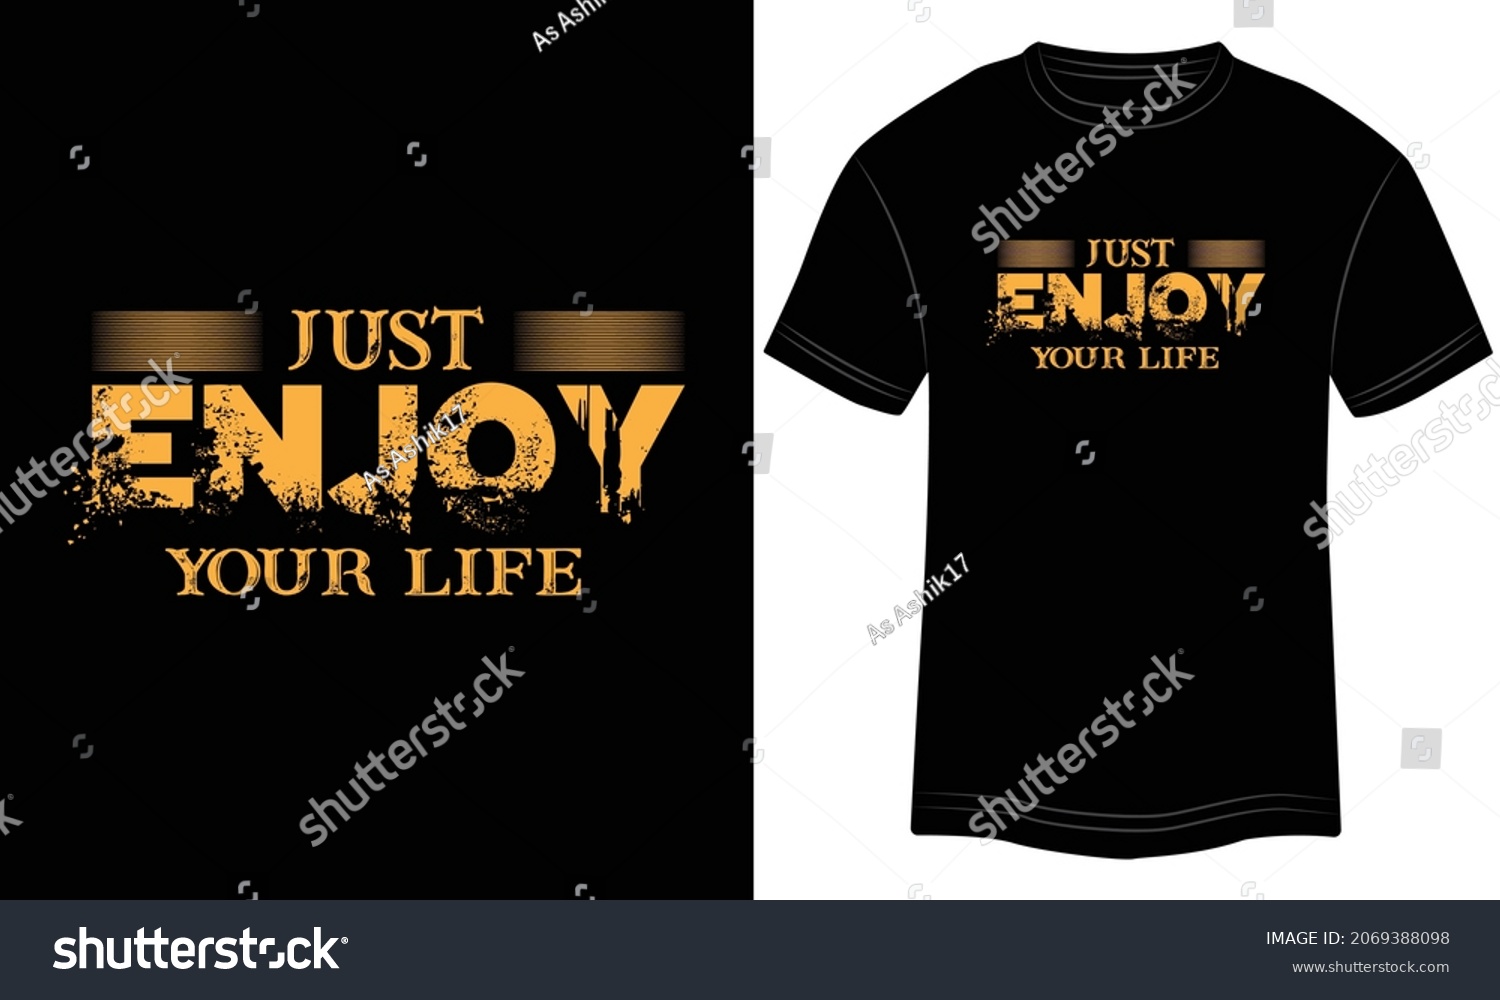 SVG of Just Enjoy Your LifeTypography T-shirt graphics, tee print design, vector, slogan. Motivational Text, Quote
Vector illustration design for t-shirt graphics. svg